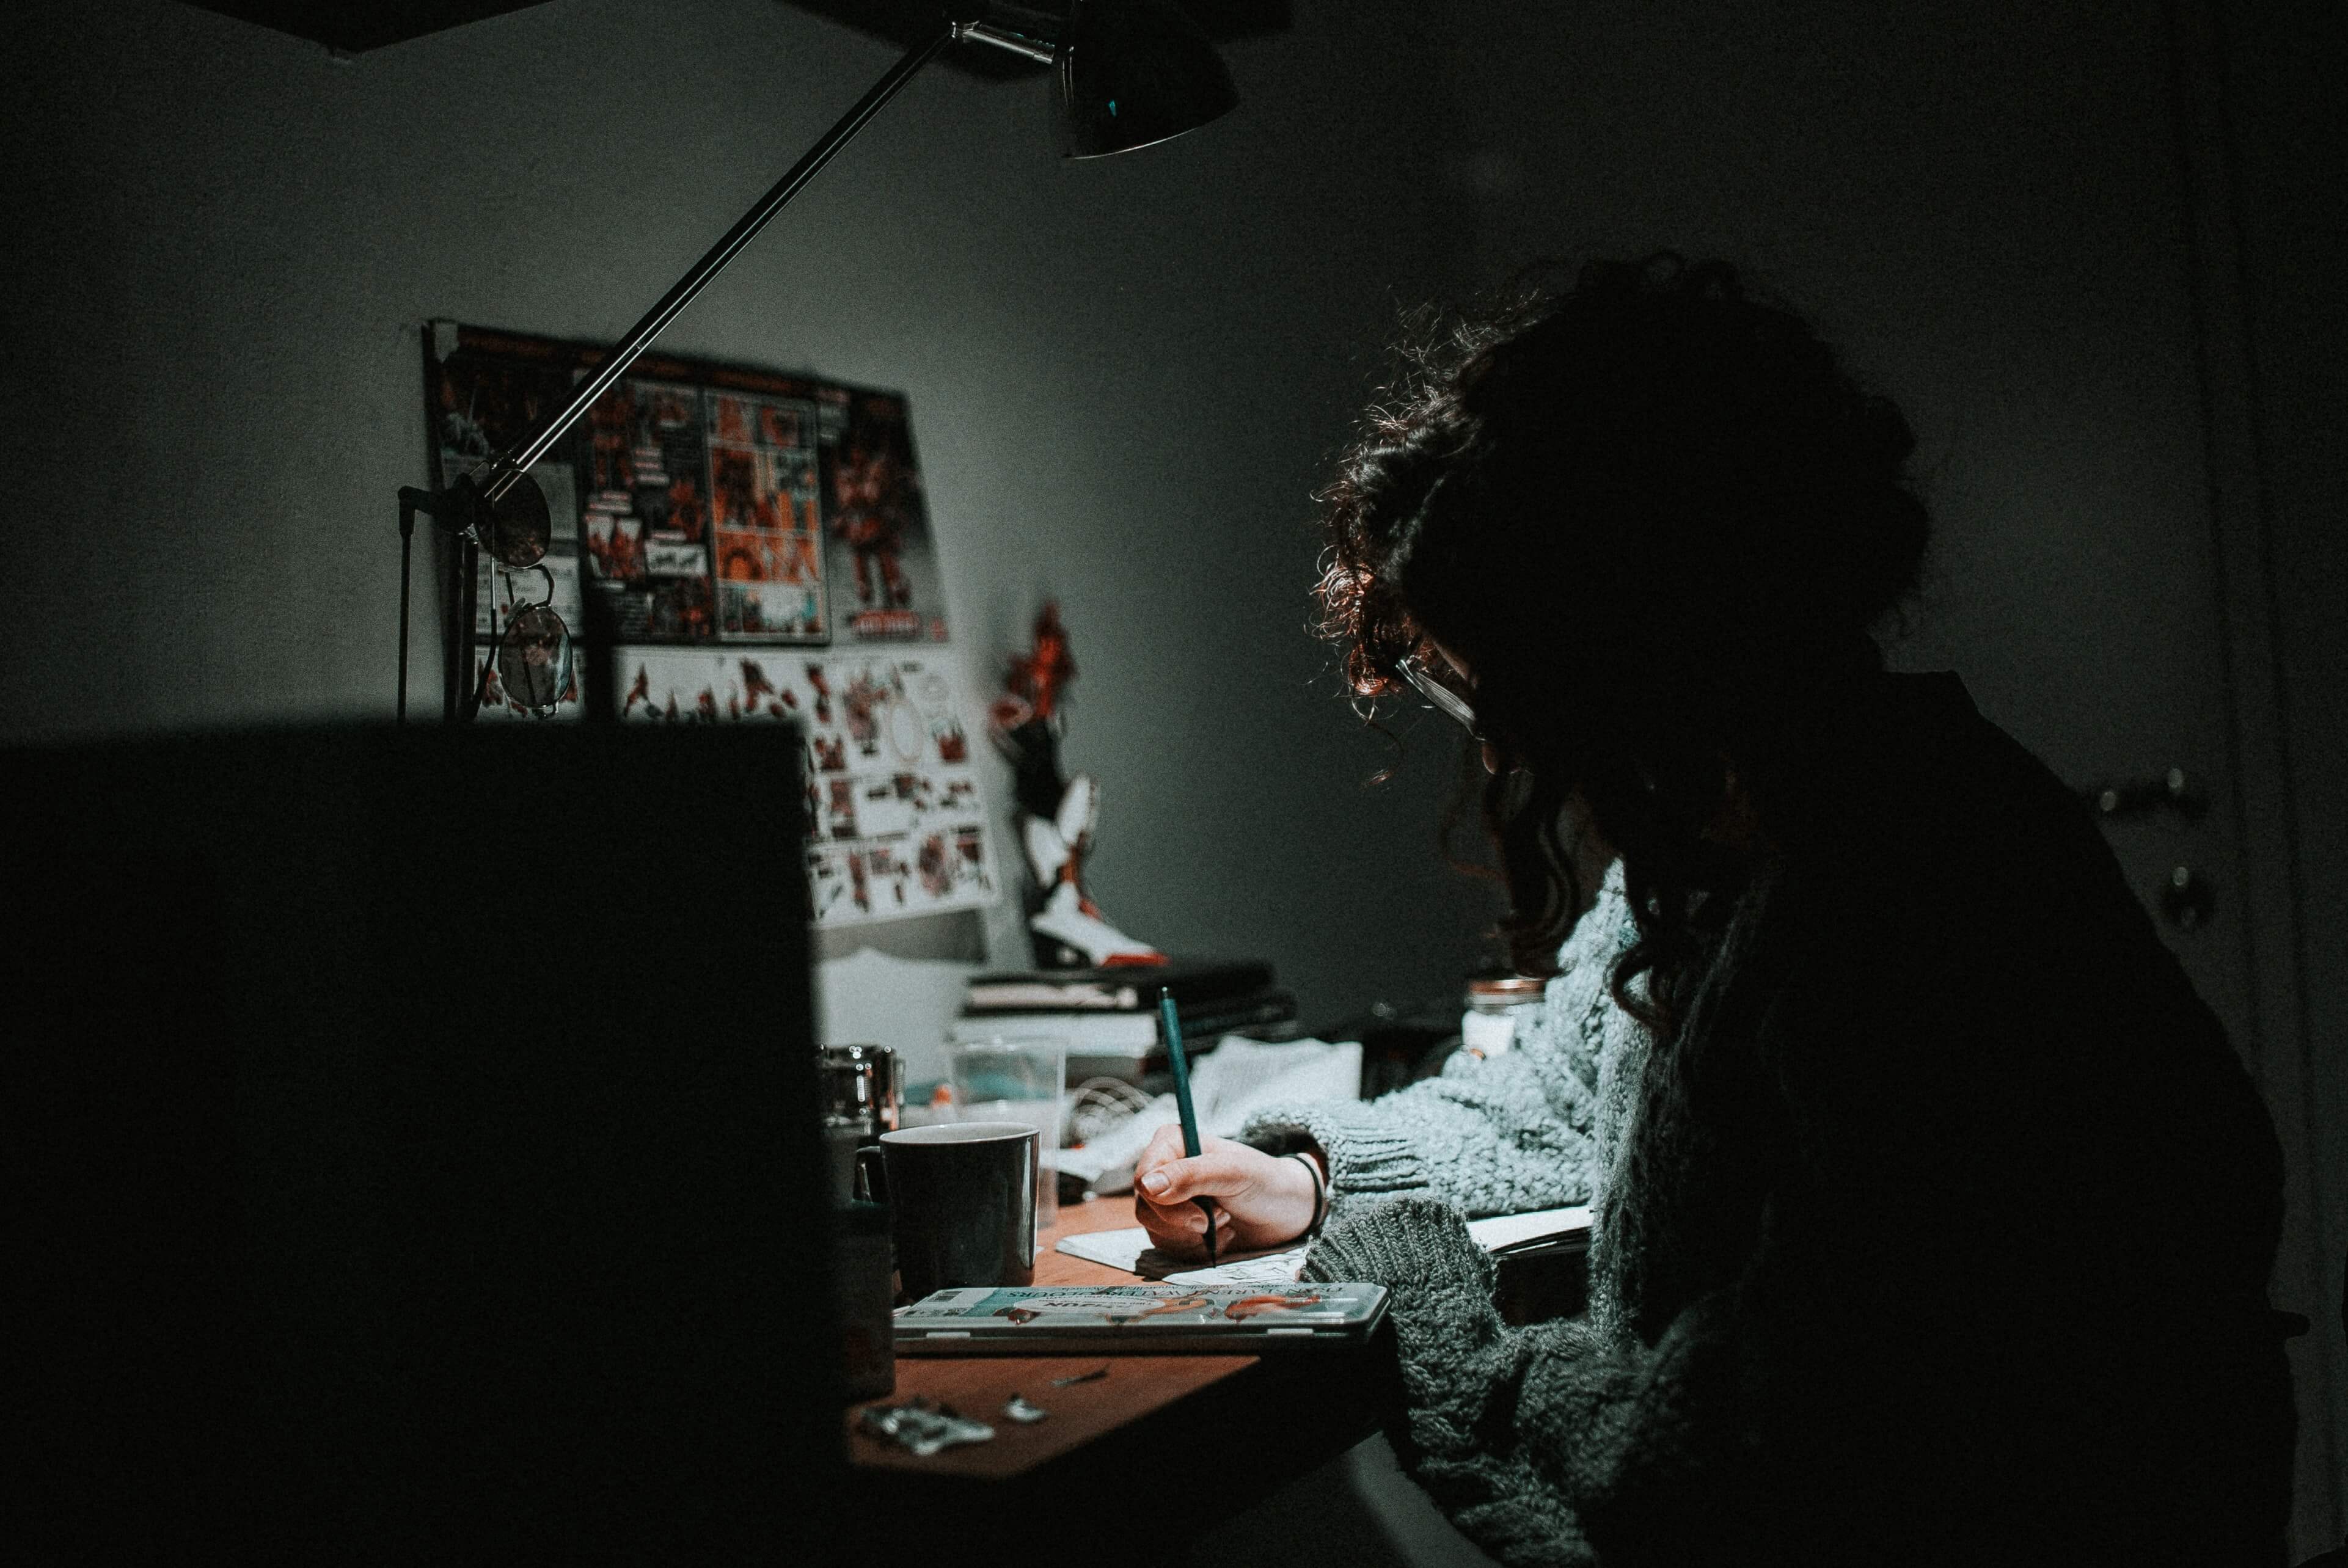 Female drawing at a desk in a dimly lit room with a mood board above and a green mug on the desk.